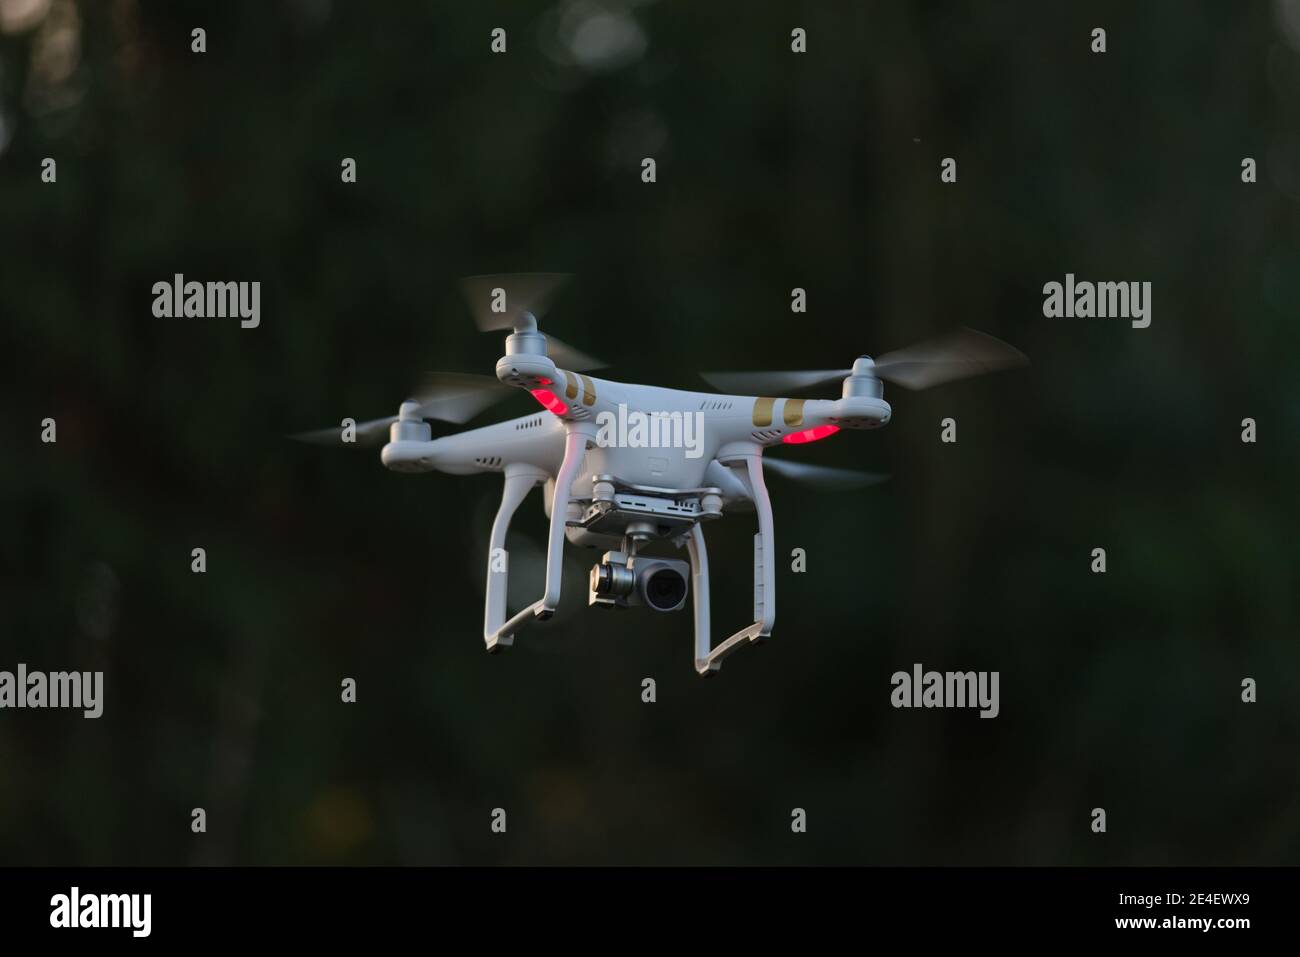 8 - UAV drone copter flying, isolated against plain background. Modern technology in action, used for videography and photography. Stock Photo